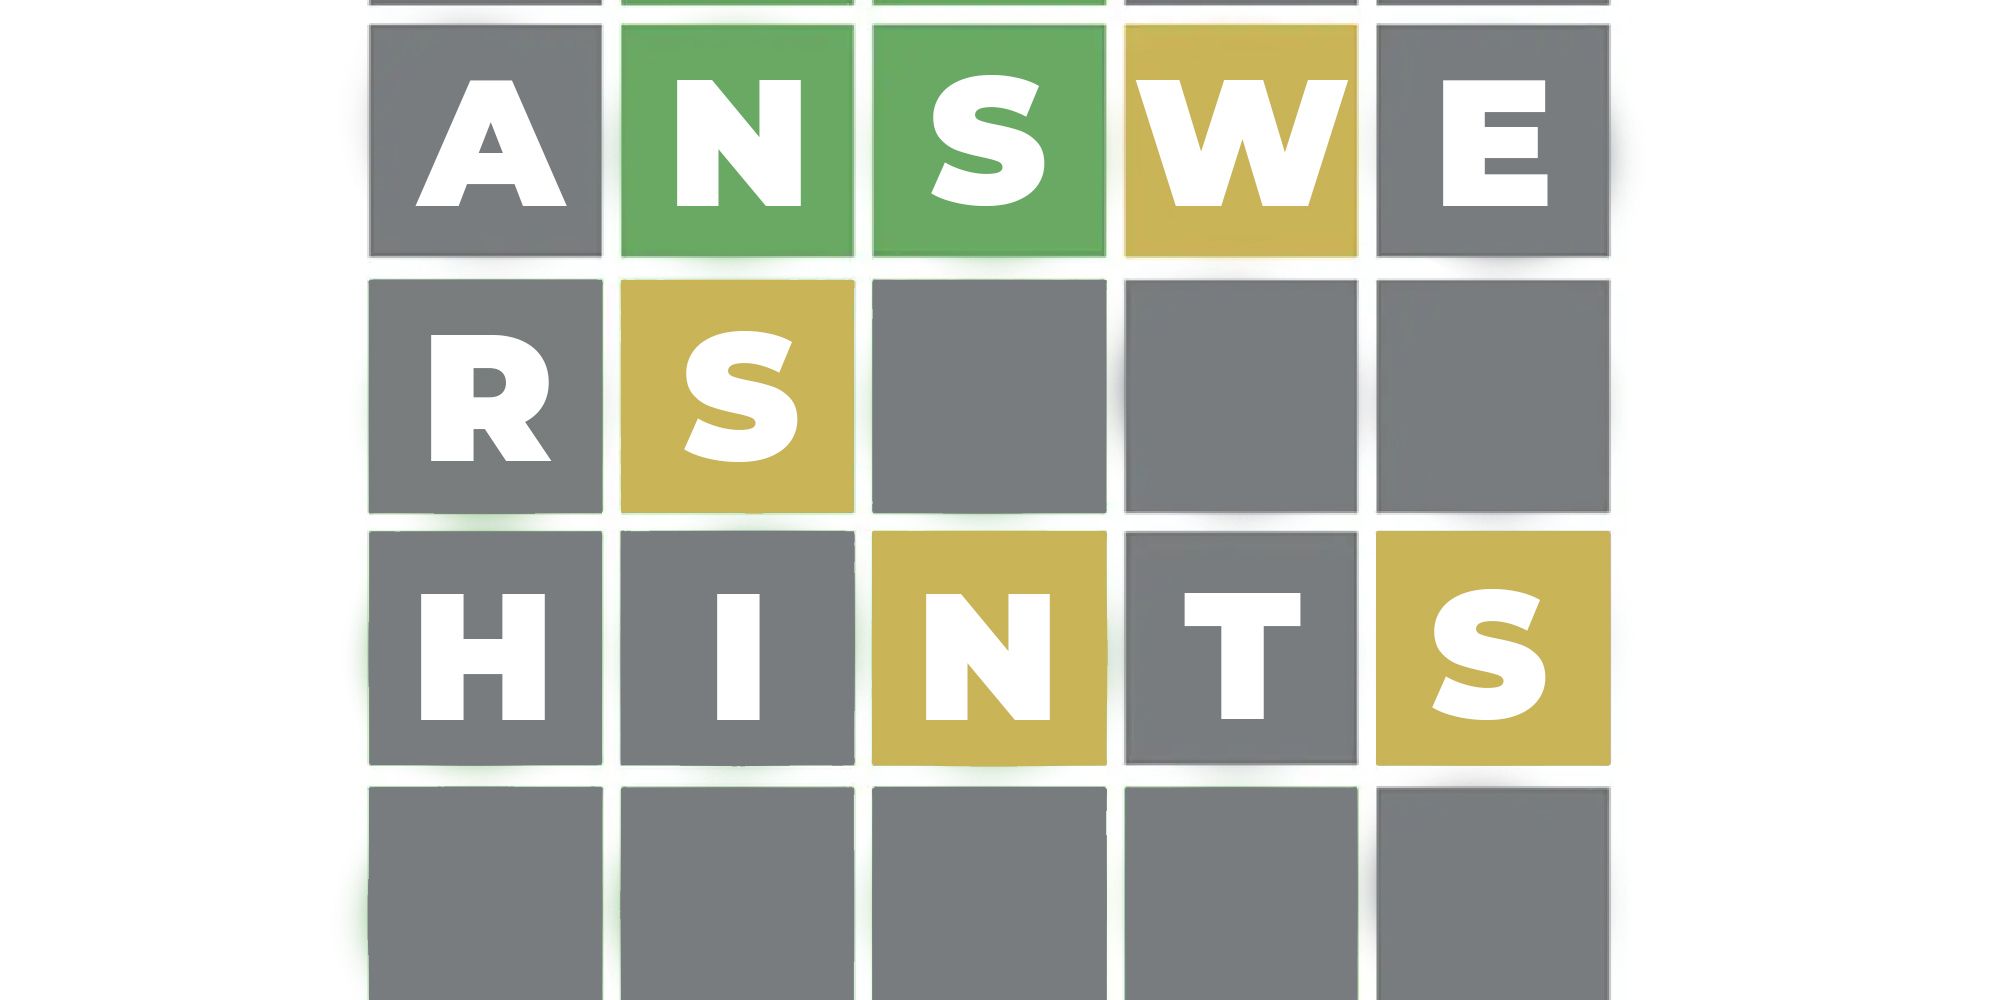 wordle answers & hints